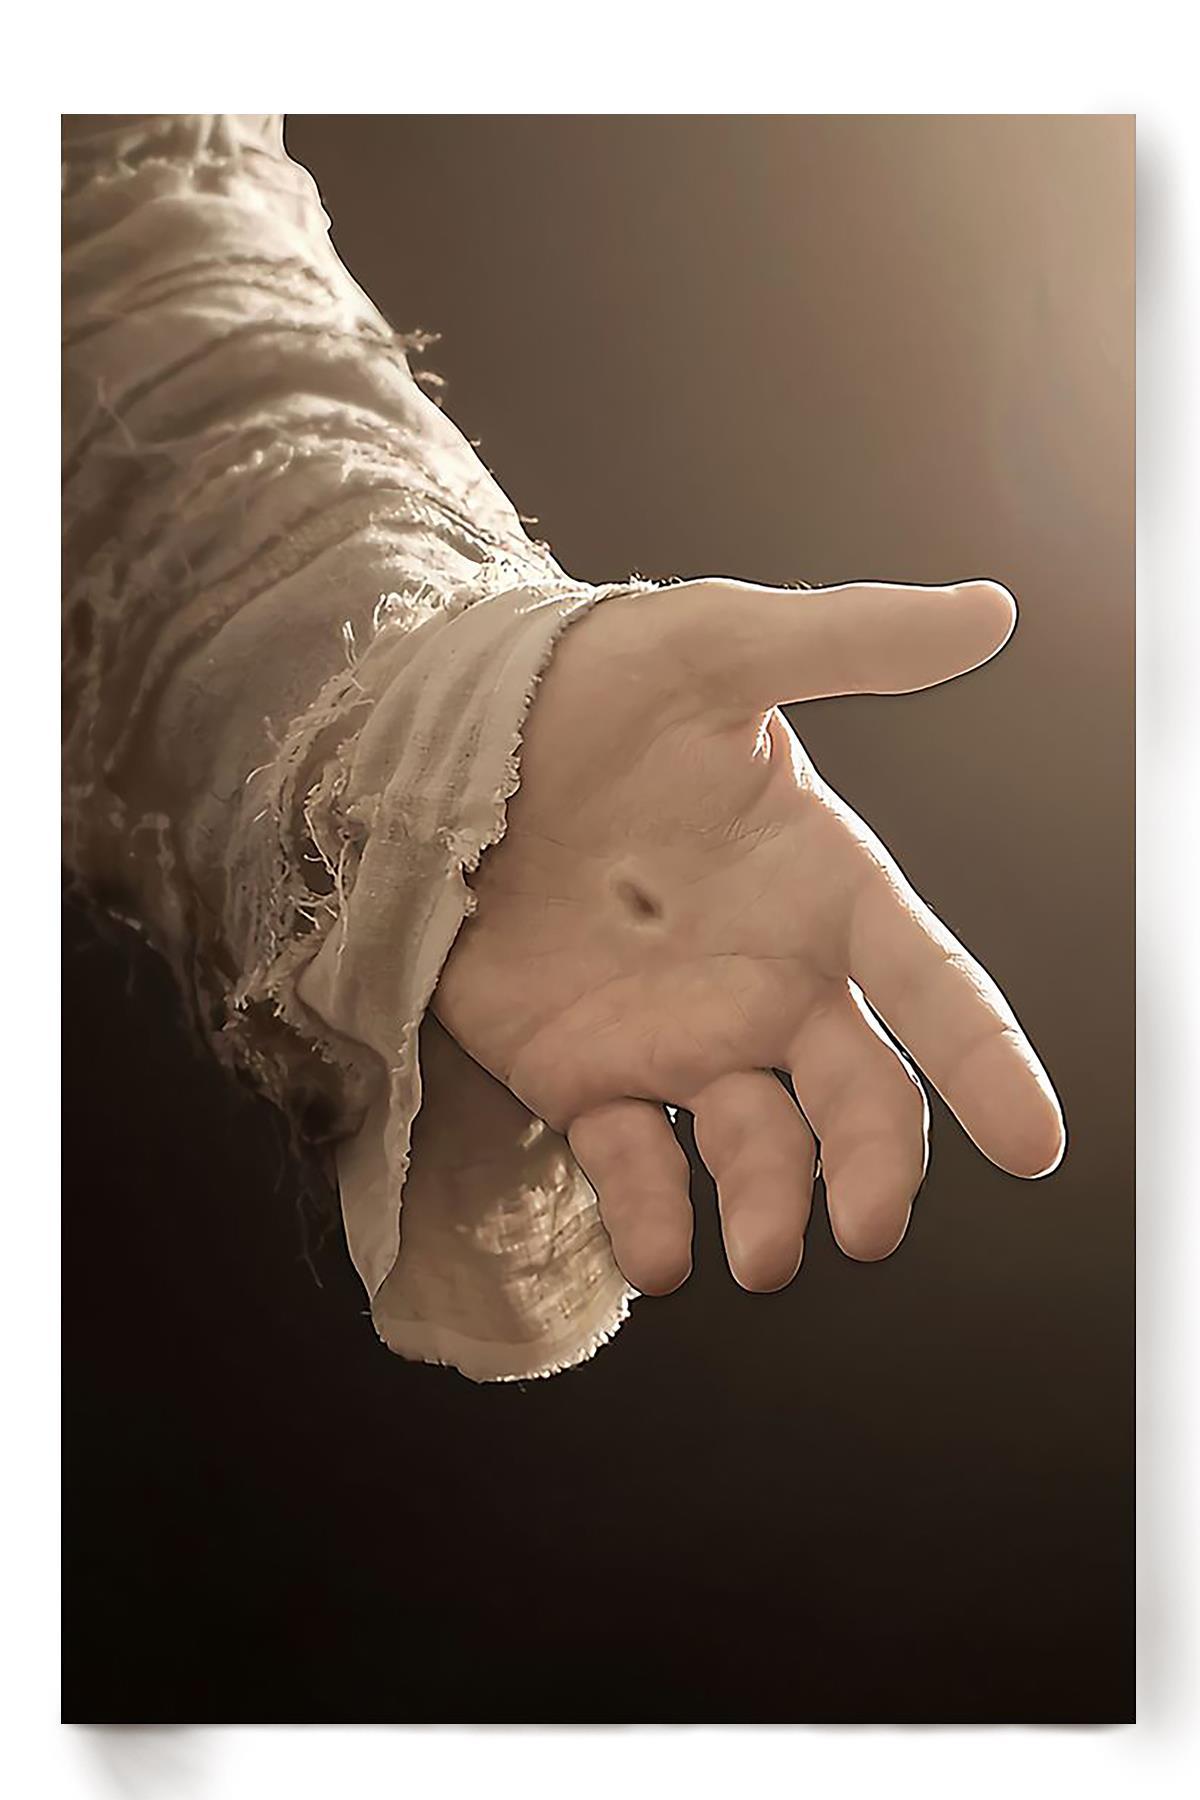 God Gives Hand Christs Christians Home Decor Give Me Your Hand Hand Of Jesus Christ Religious 03 Poster